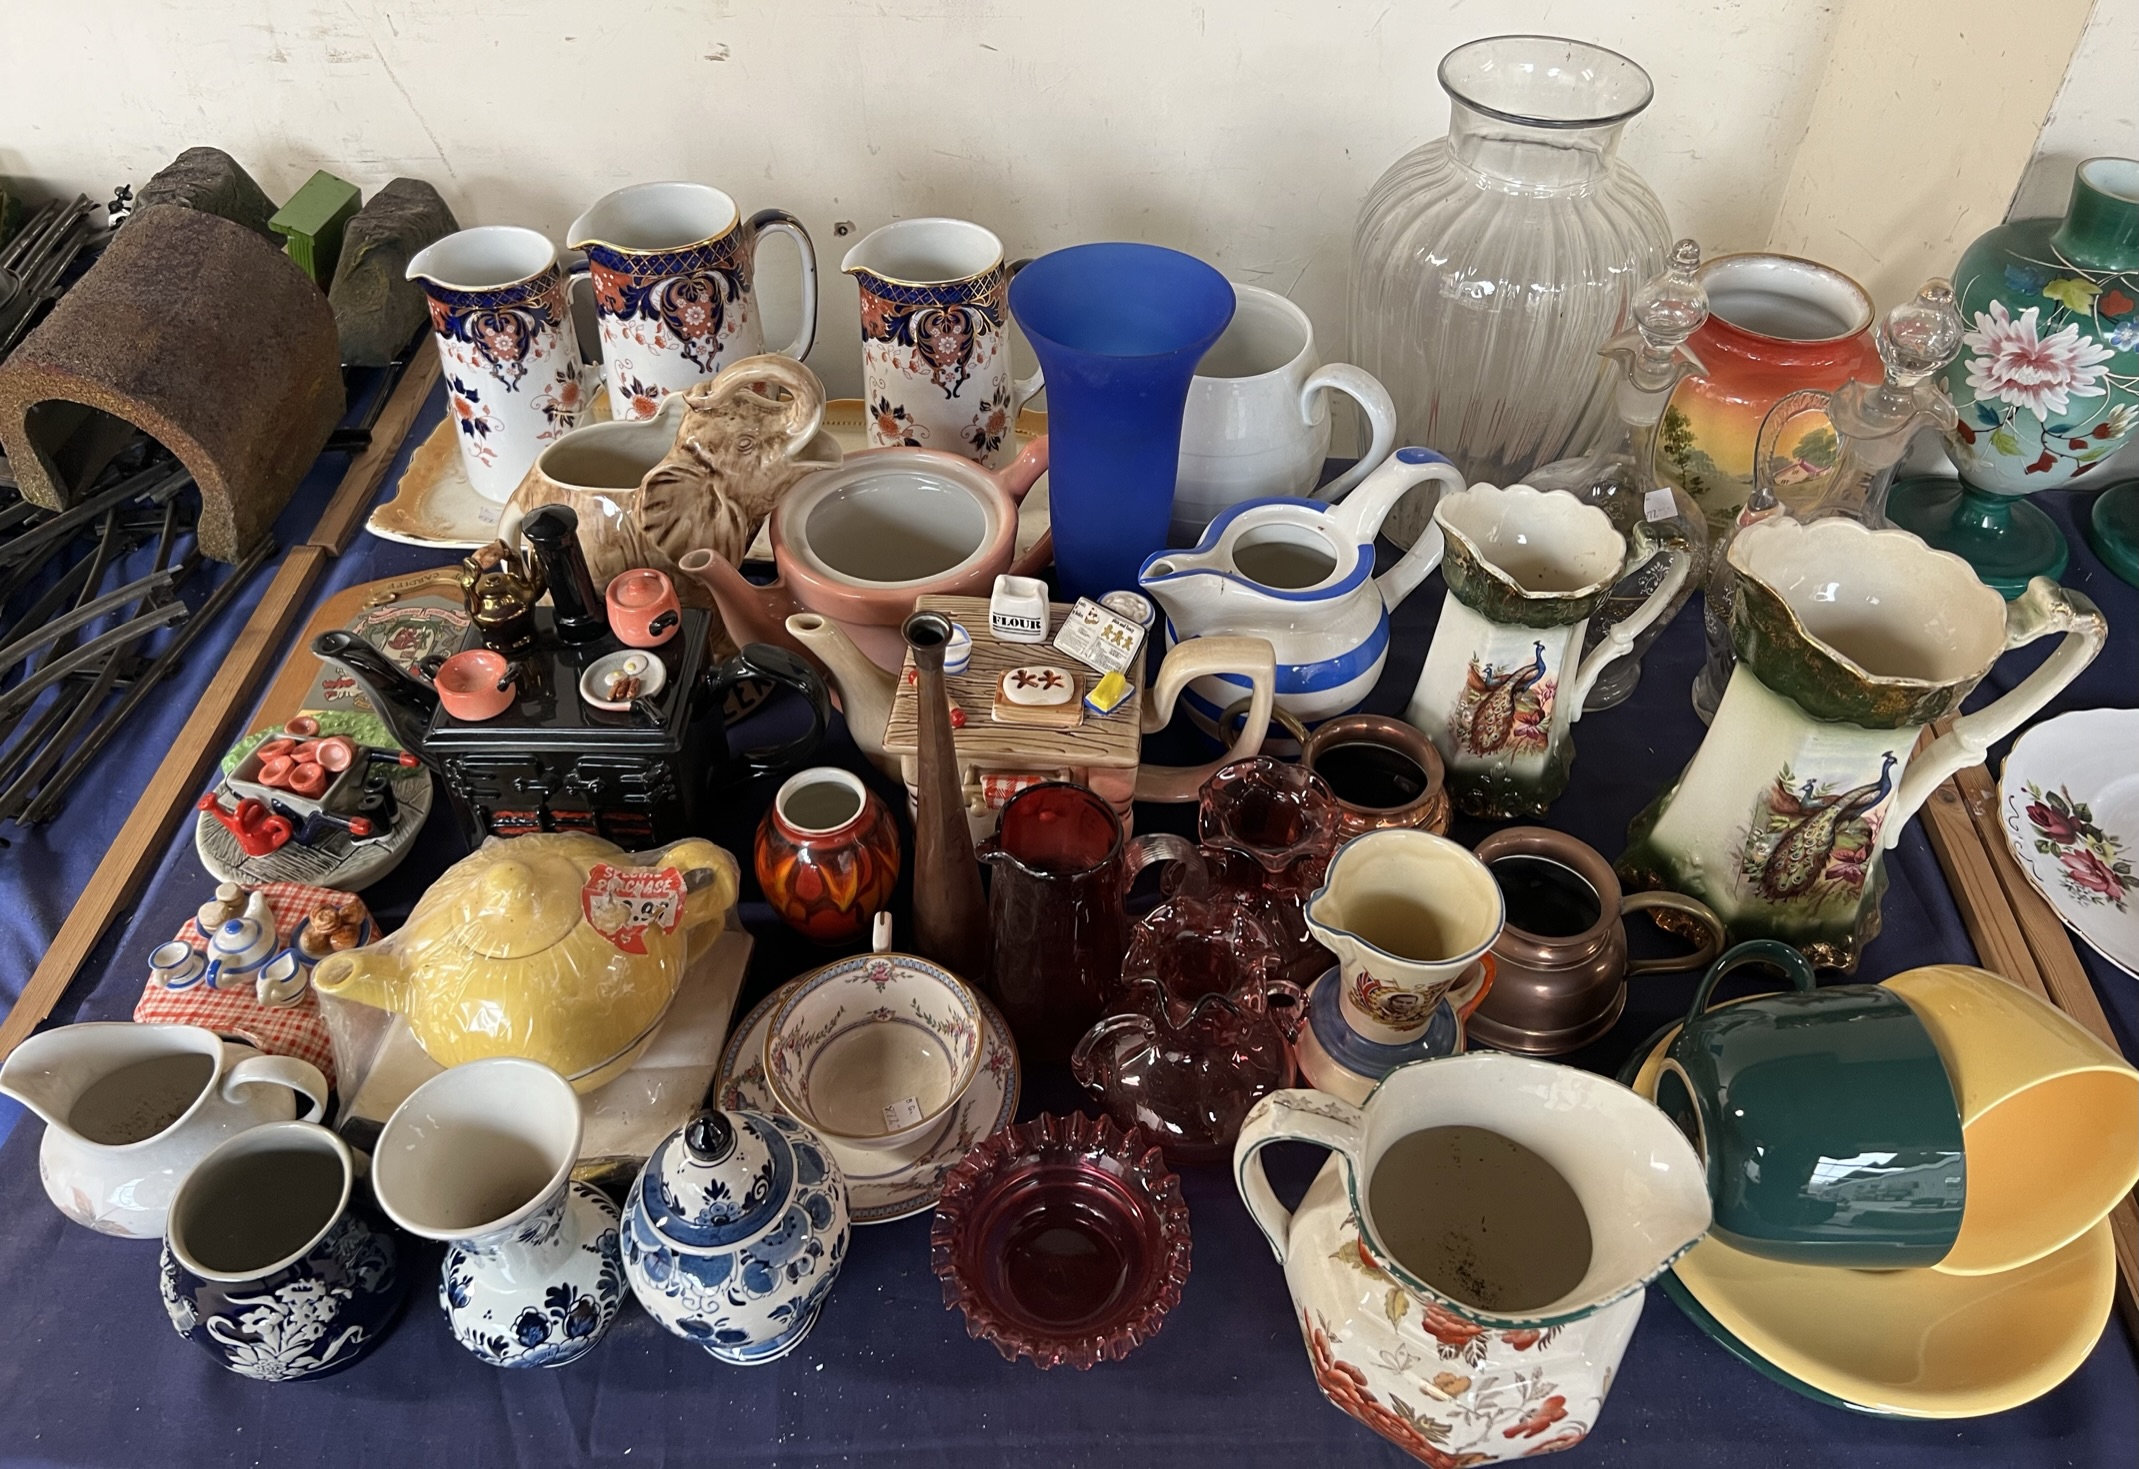 Graduated pottery jugs together with glass decanters, novelty teapots,